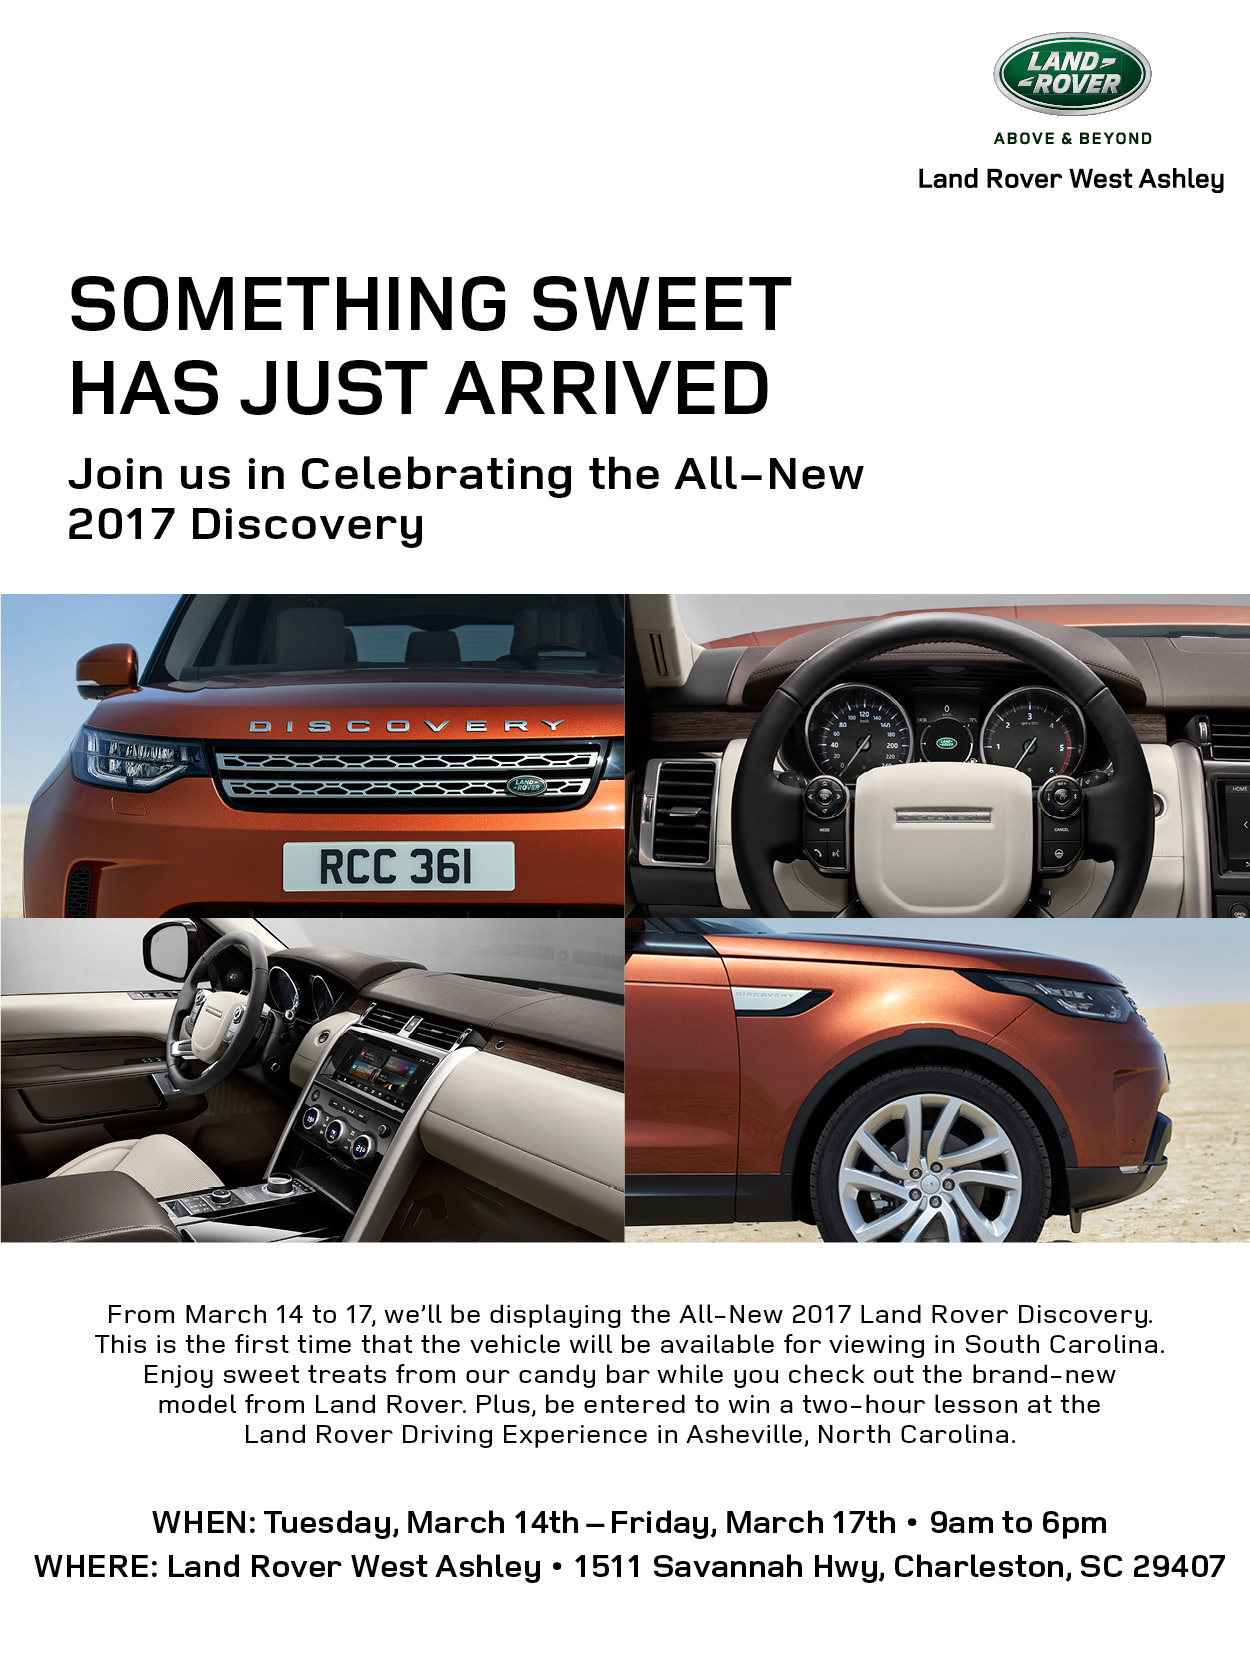 Join Us in Celebrating the All-New 2017 Discovery